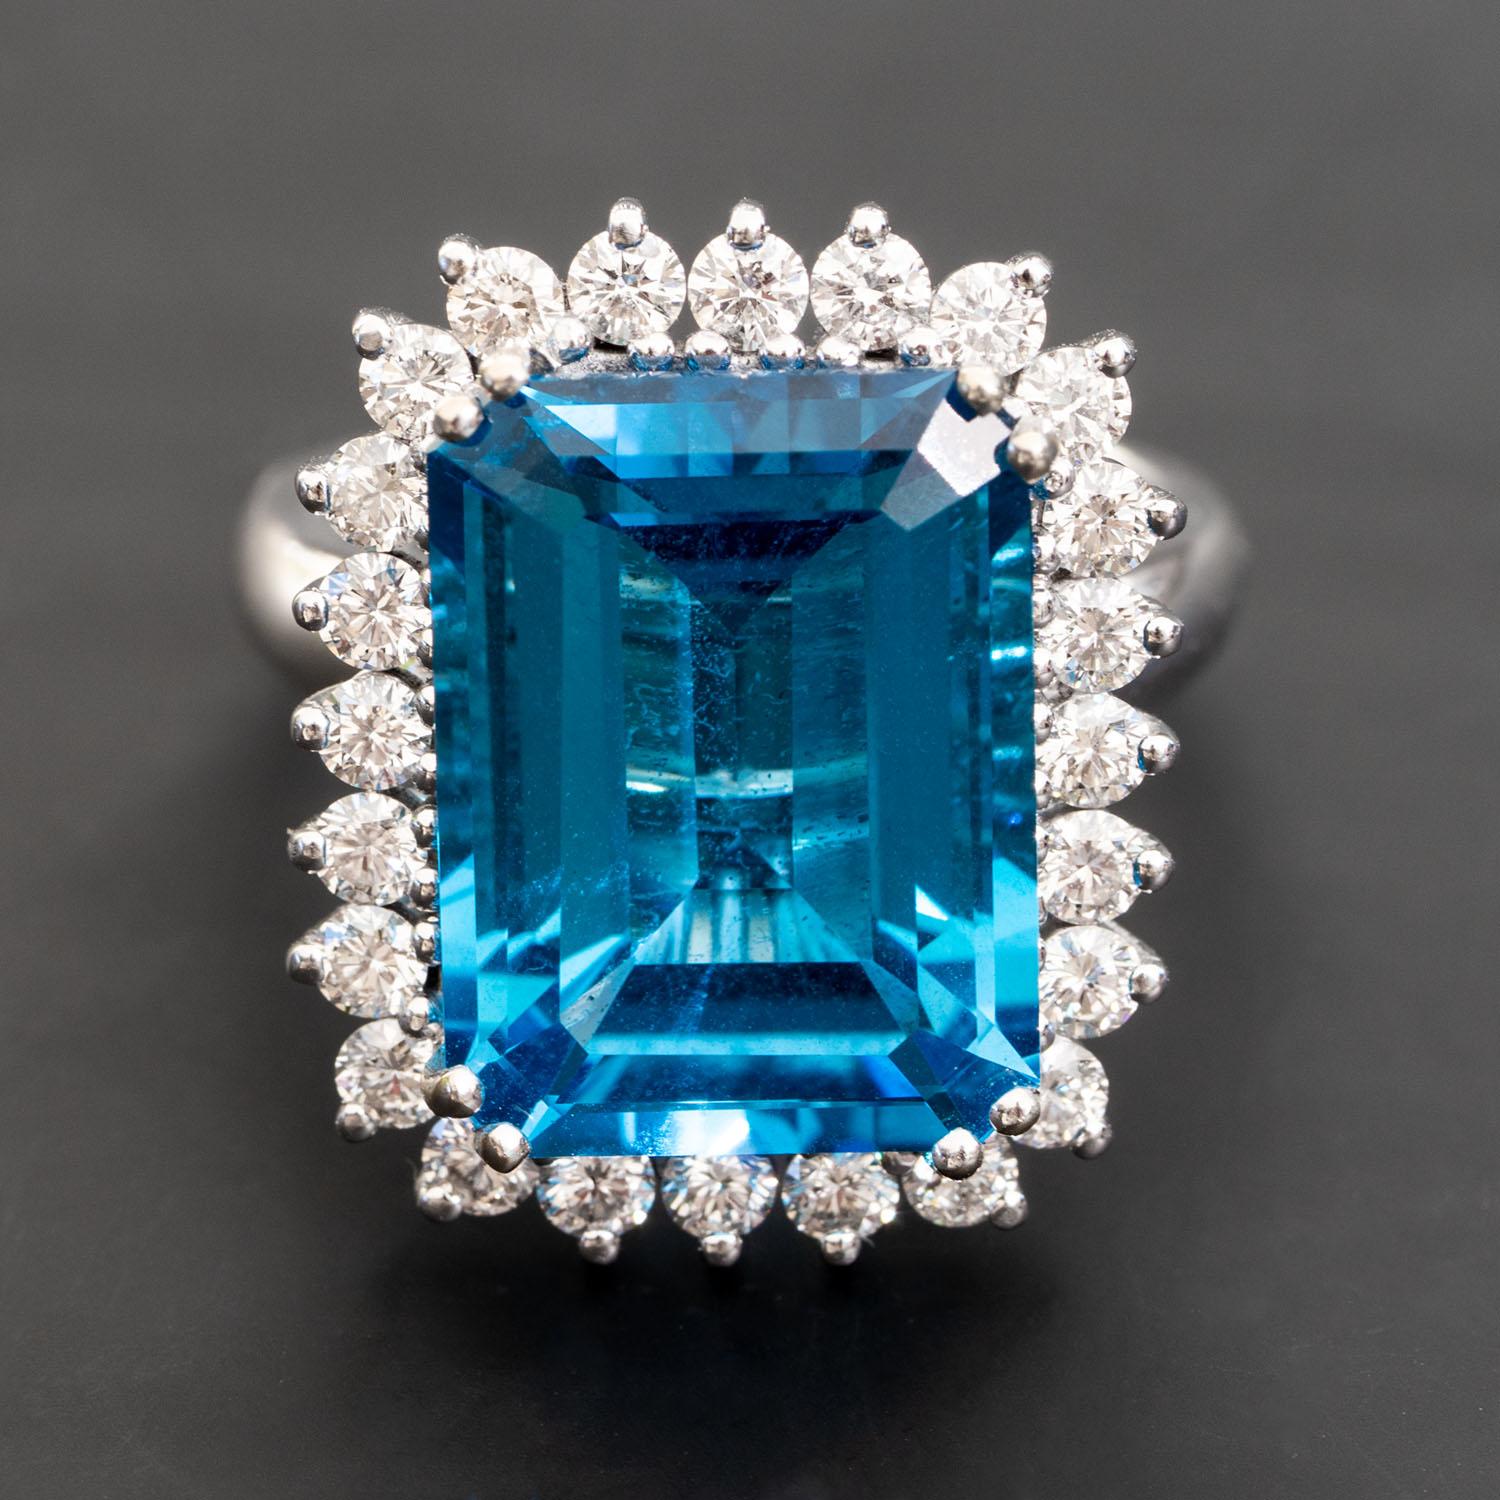 This vintage-style edge design features 1.34 carat of VS white natural diamonds, the perfect contrast to the translucent blue of this 13.00 carat natural topaz cocktail ring. The modern basket-style setting supports the gemstones in the ring’s face